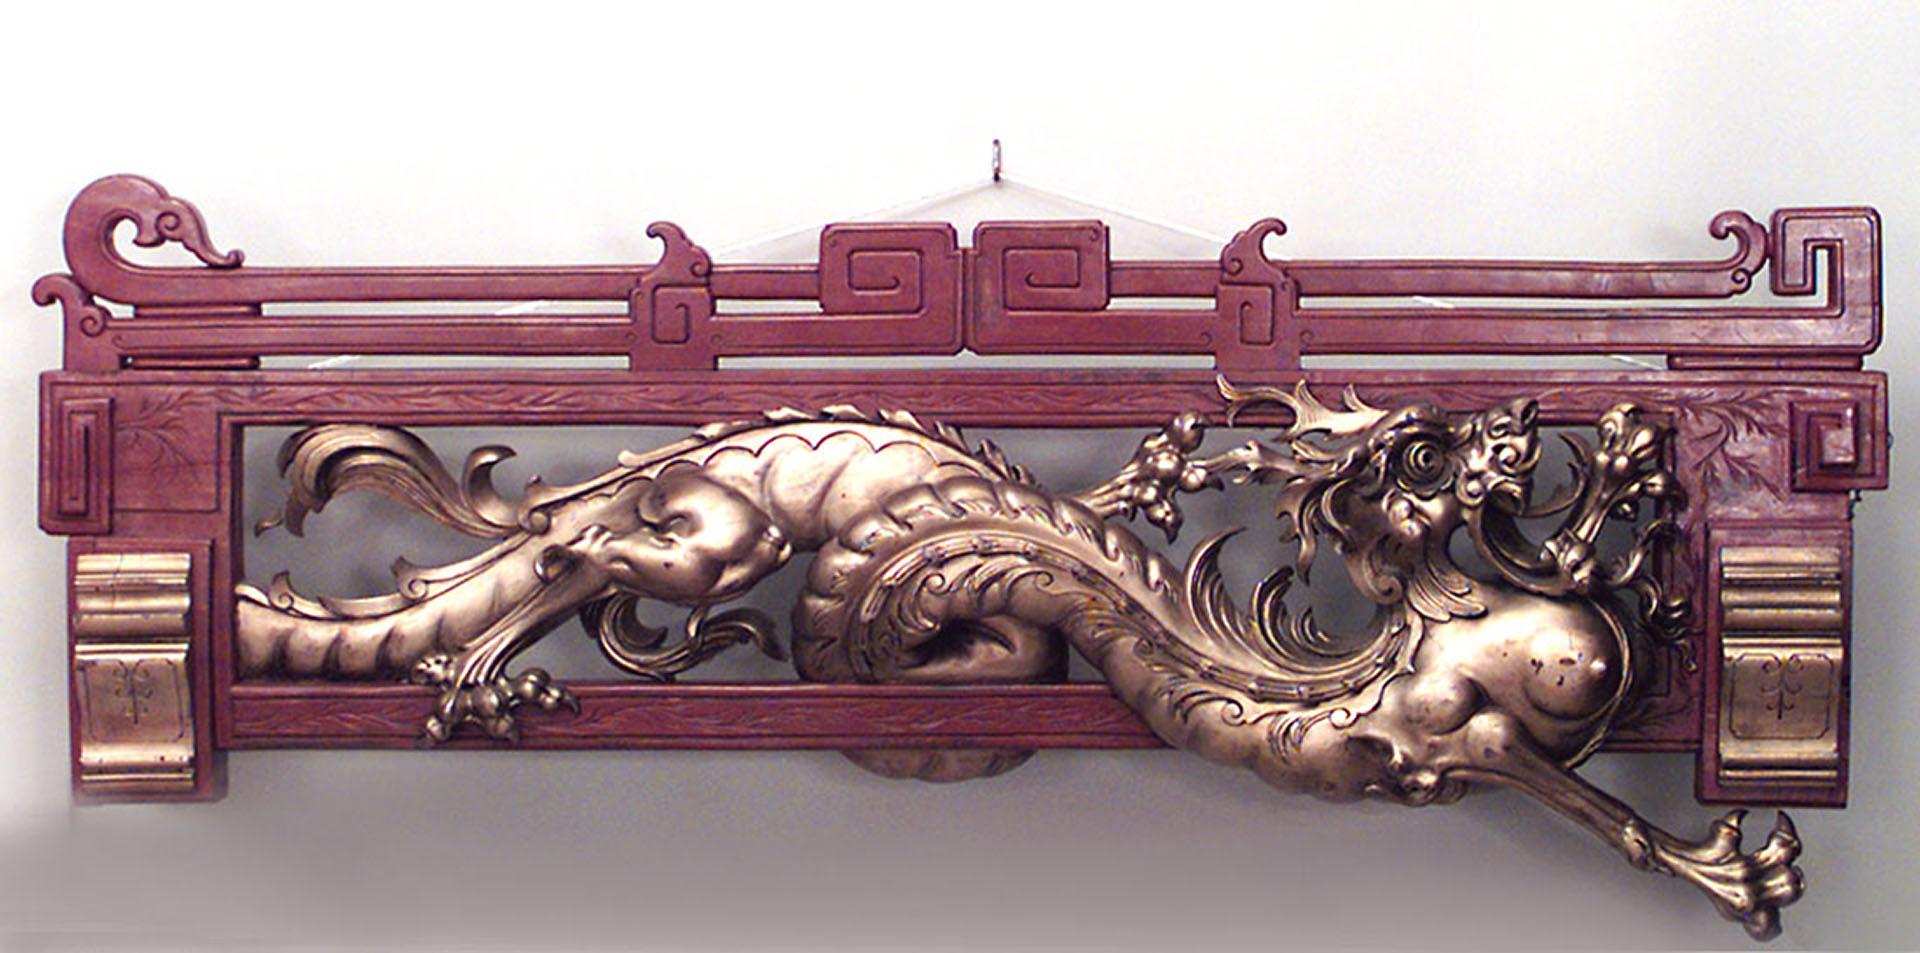 Pair of English Regency style (19th Century) red and gold painted horizontal dragon wall plaques (PRICED AS Pair).
